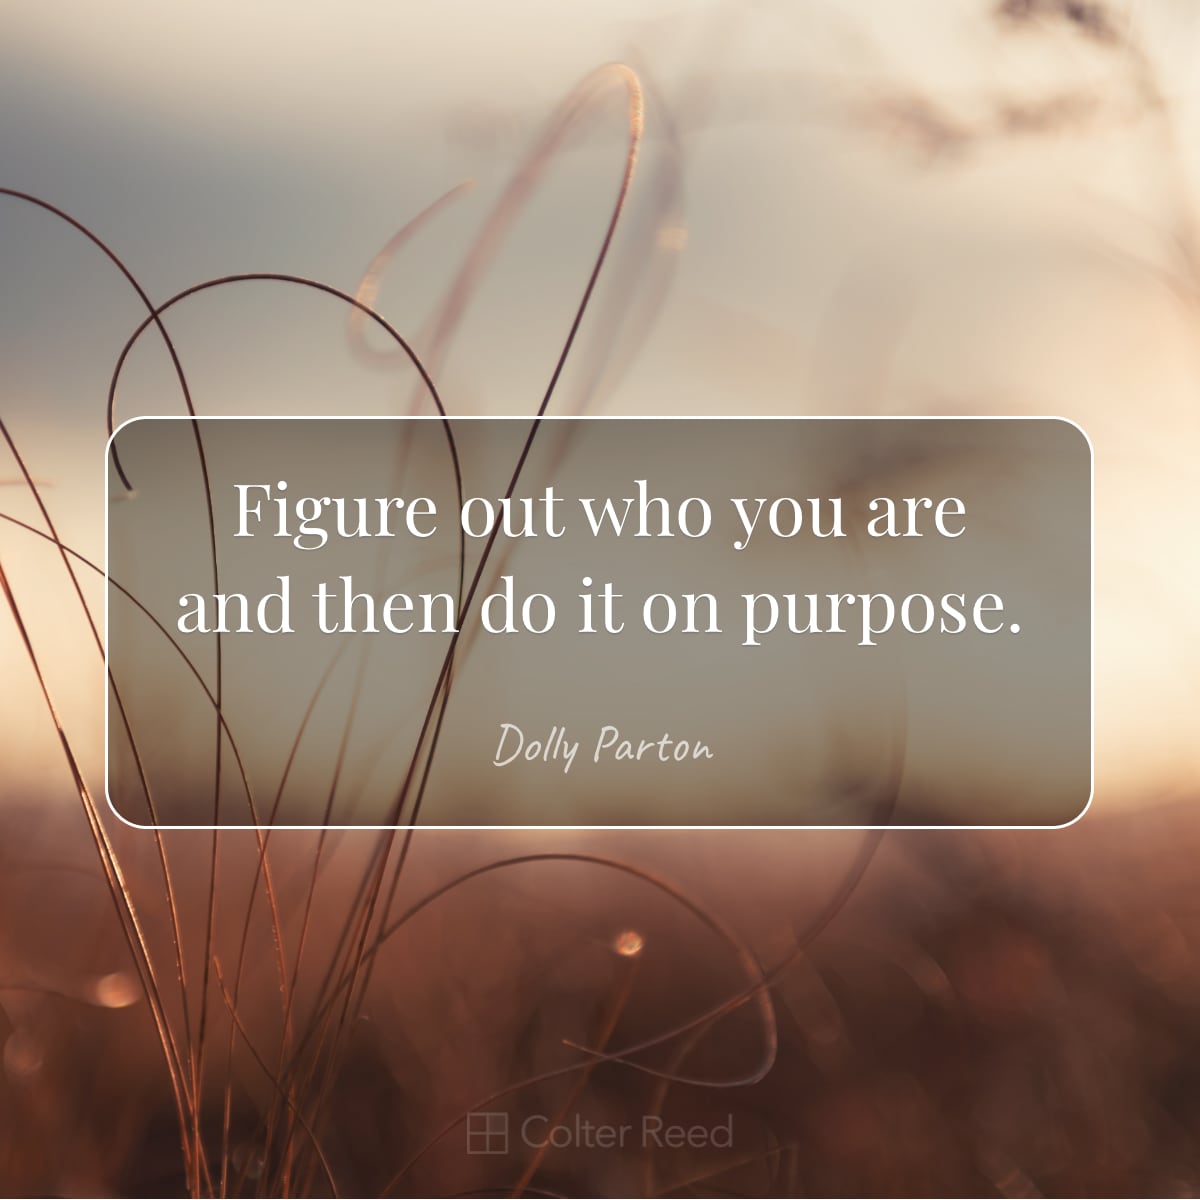 Figure out who you are and then do it on purpose. —Dolly Parton